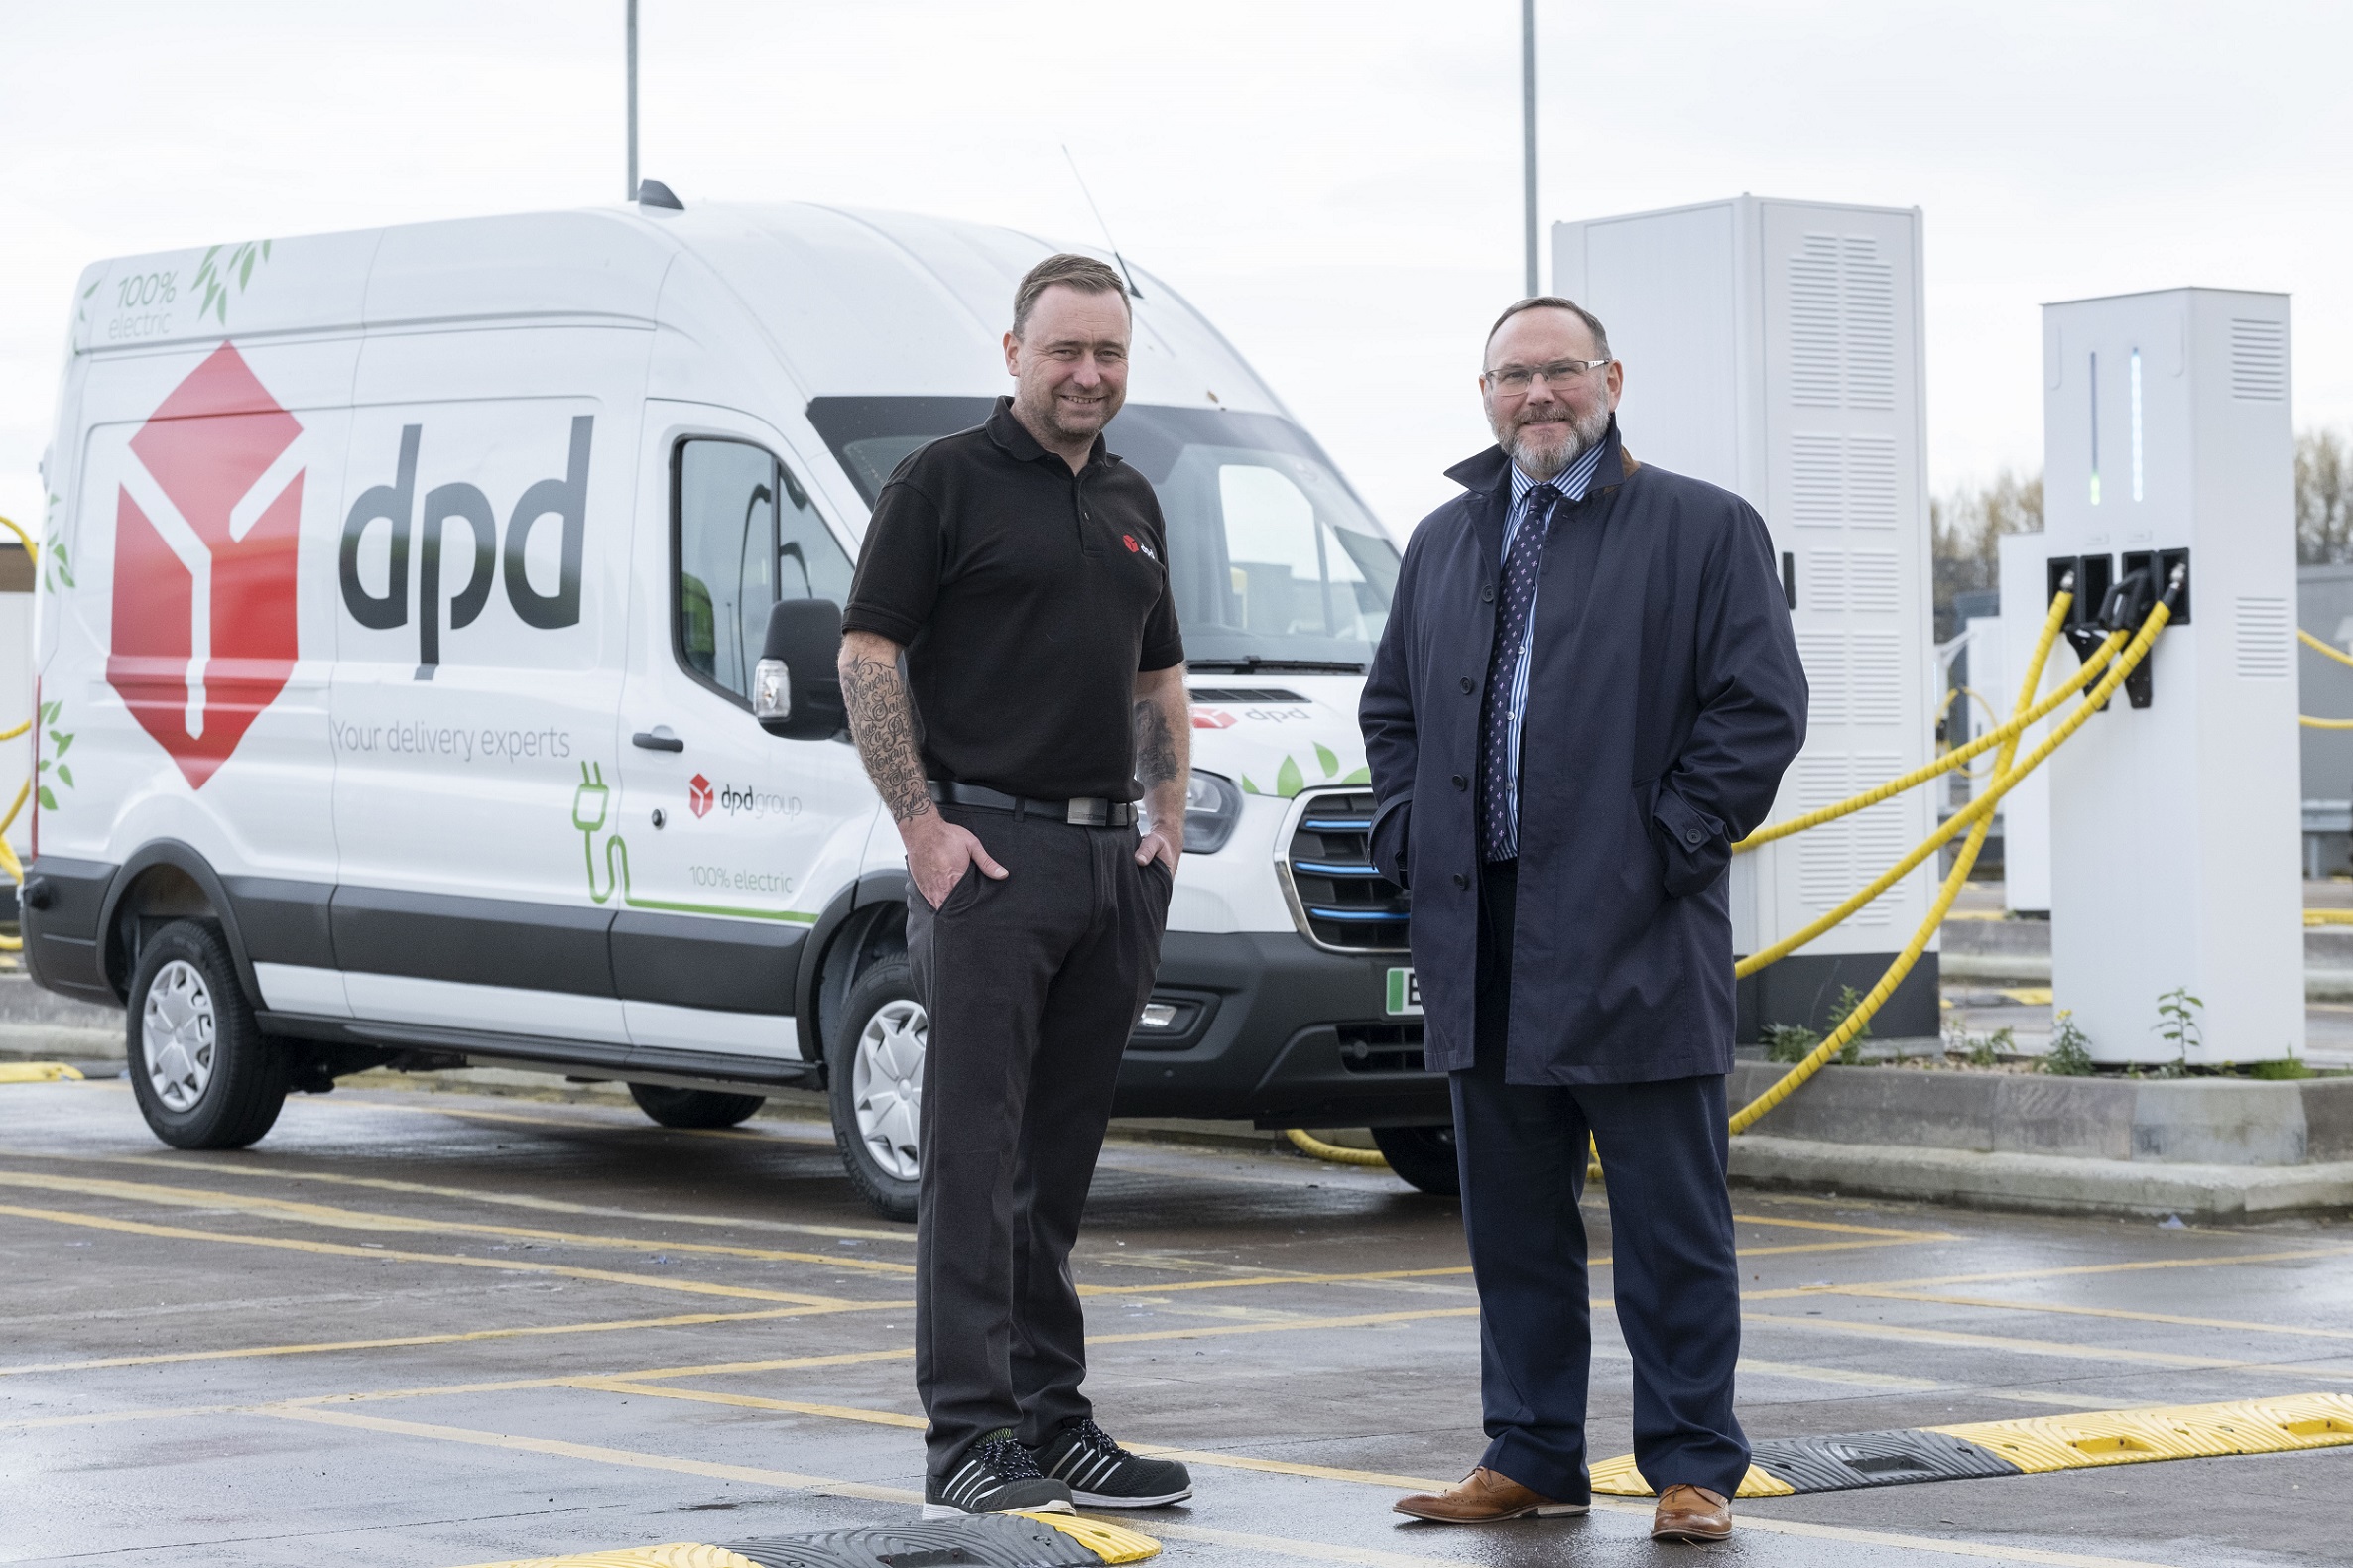 First Bus Glasgow agrees with DPD to use Caledonia depot chargers